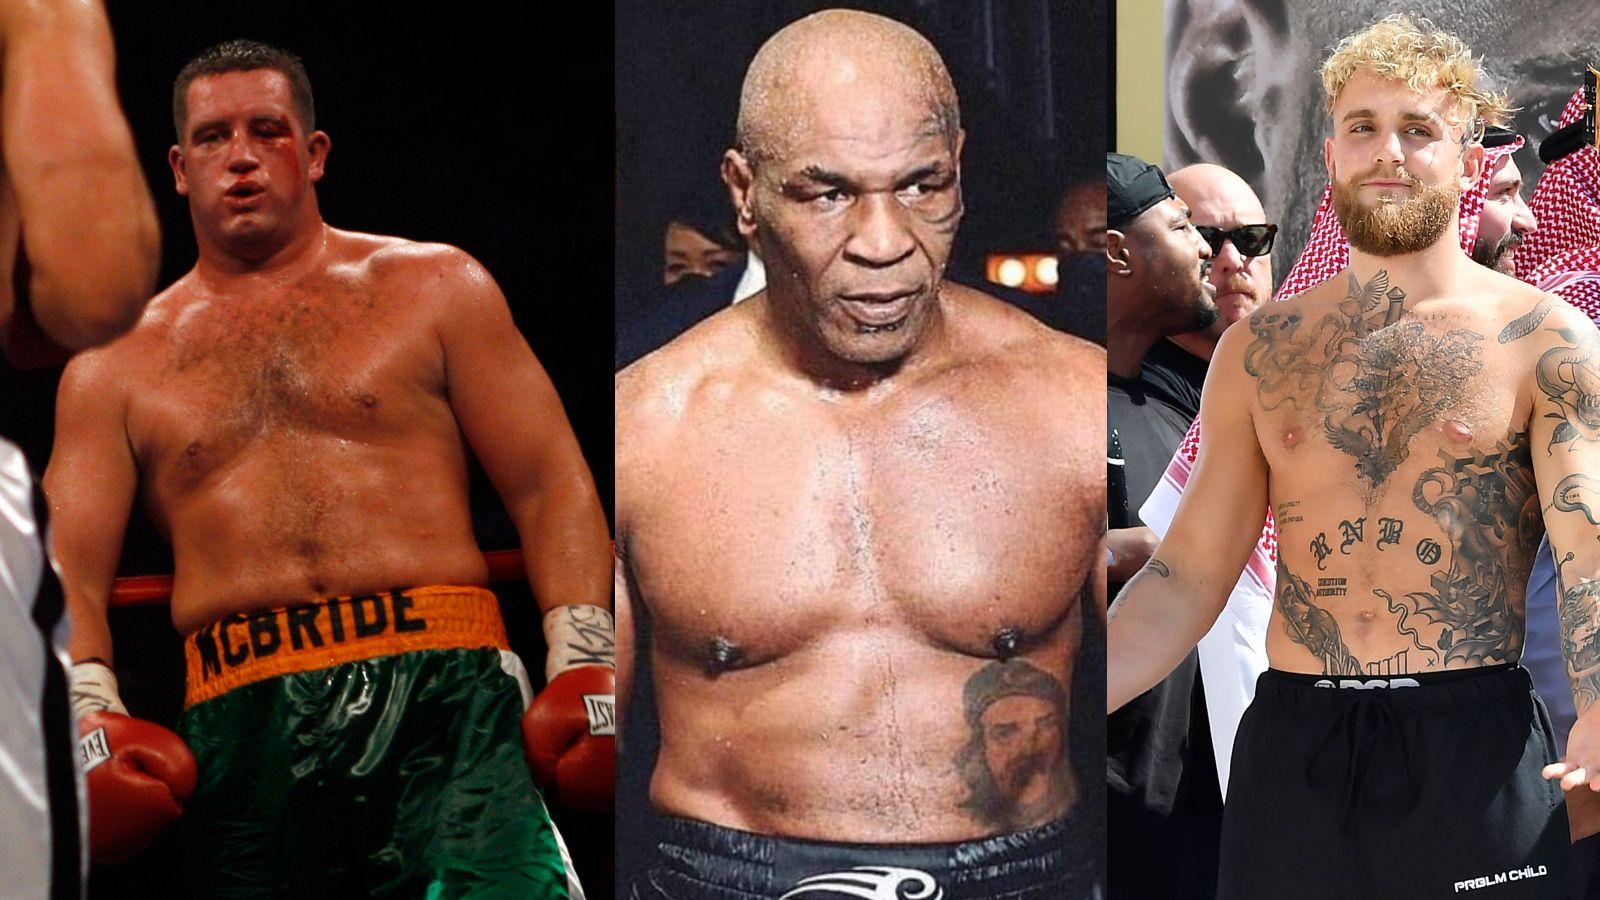 Kevin McBride in the boxing ring (left) and Mike Tyson before his fight with Roy Jones Jr. in 2020 (center) and Jake Paul at a boxing event (right).